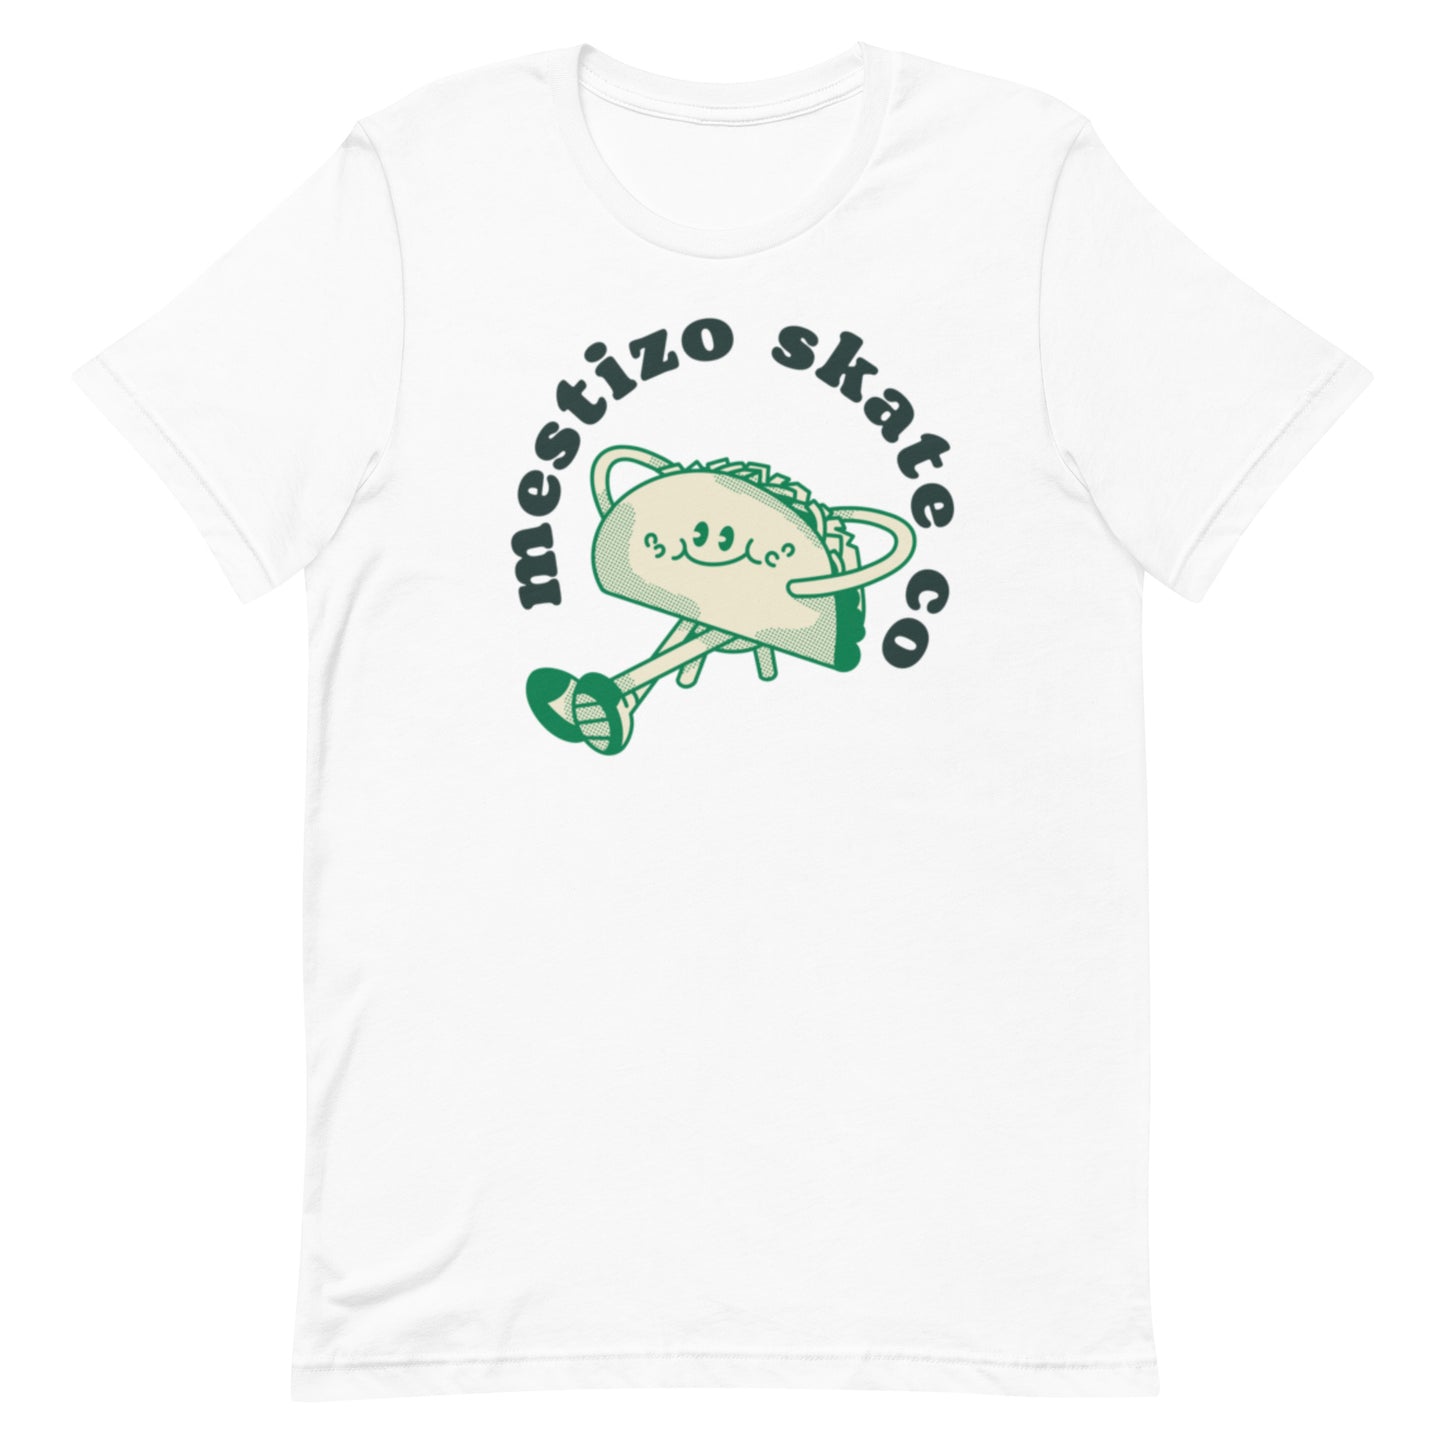 City Skate Project Taco Tuesday Unisex t-shirt